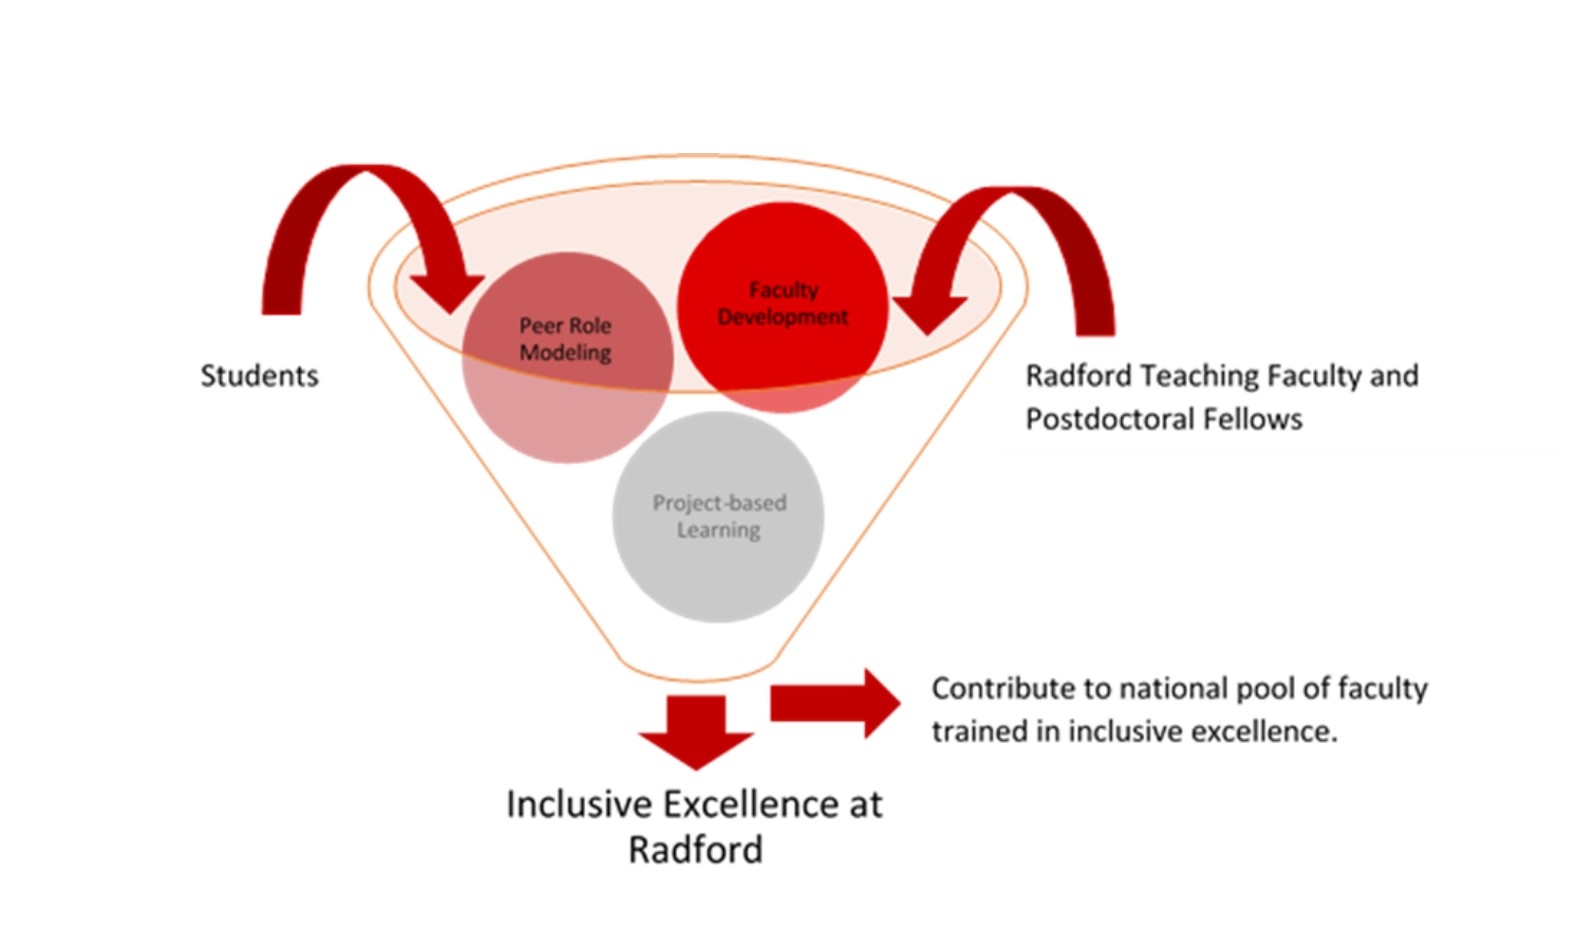 REALISE teaching graphic for inclusive excellence.  The graphic shows students, faculty development, Radford Teaching Faculty and Postdoctoral Fellows, and project based learning all going into a funnel.  Coming out of the funnel is Inclusive Excellence and contributing to a national pool of faculty trained in inclusive excellence.